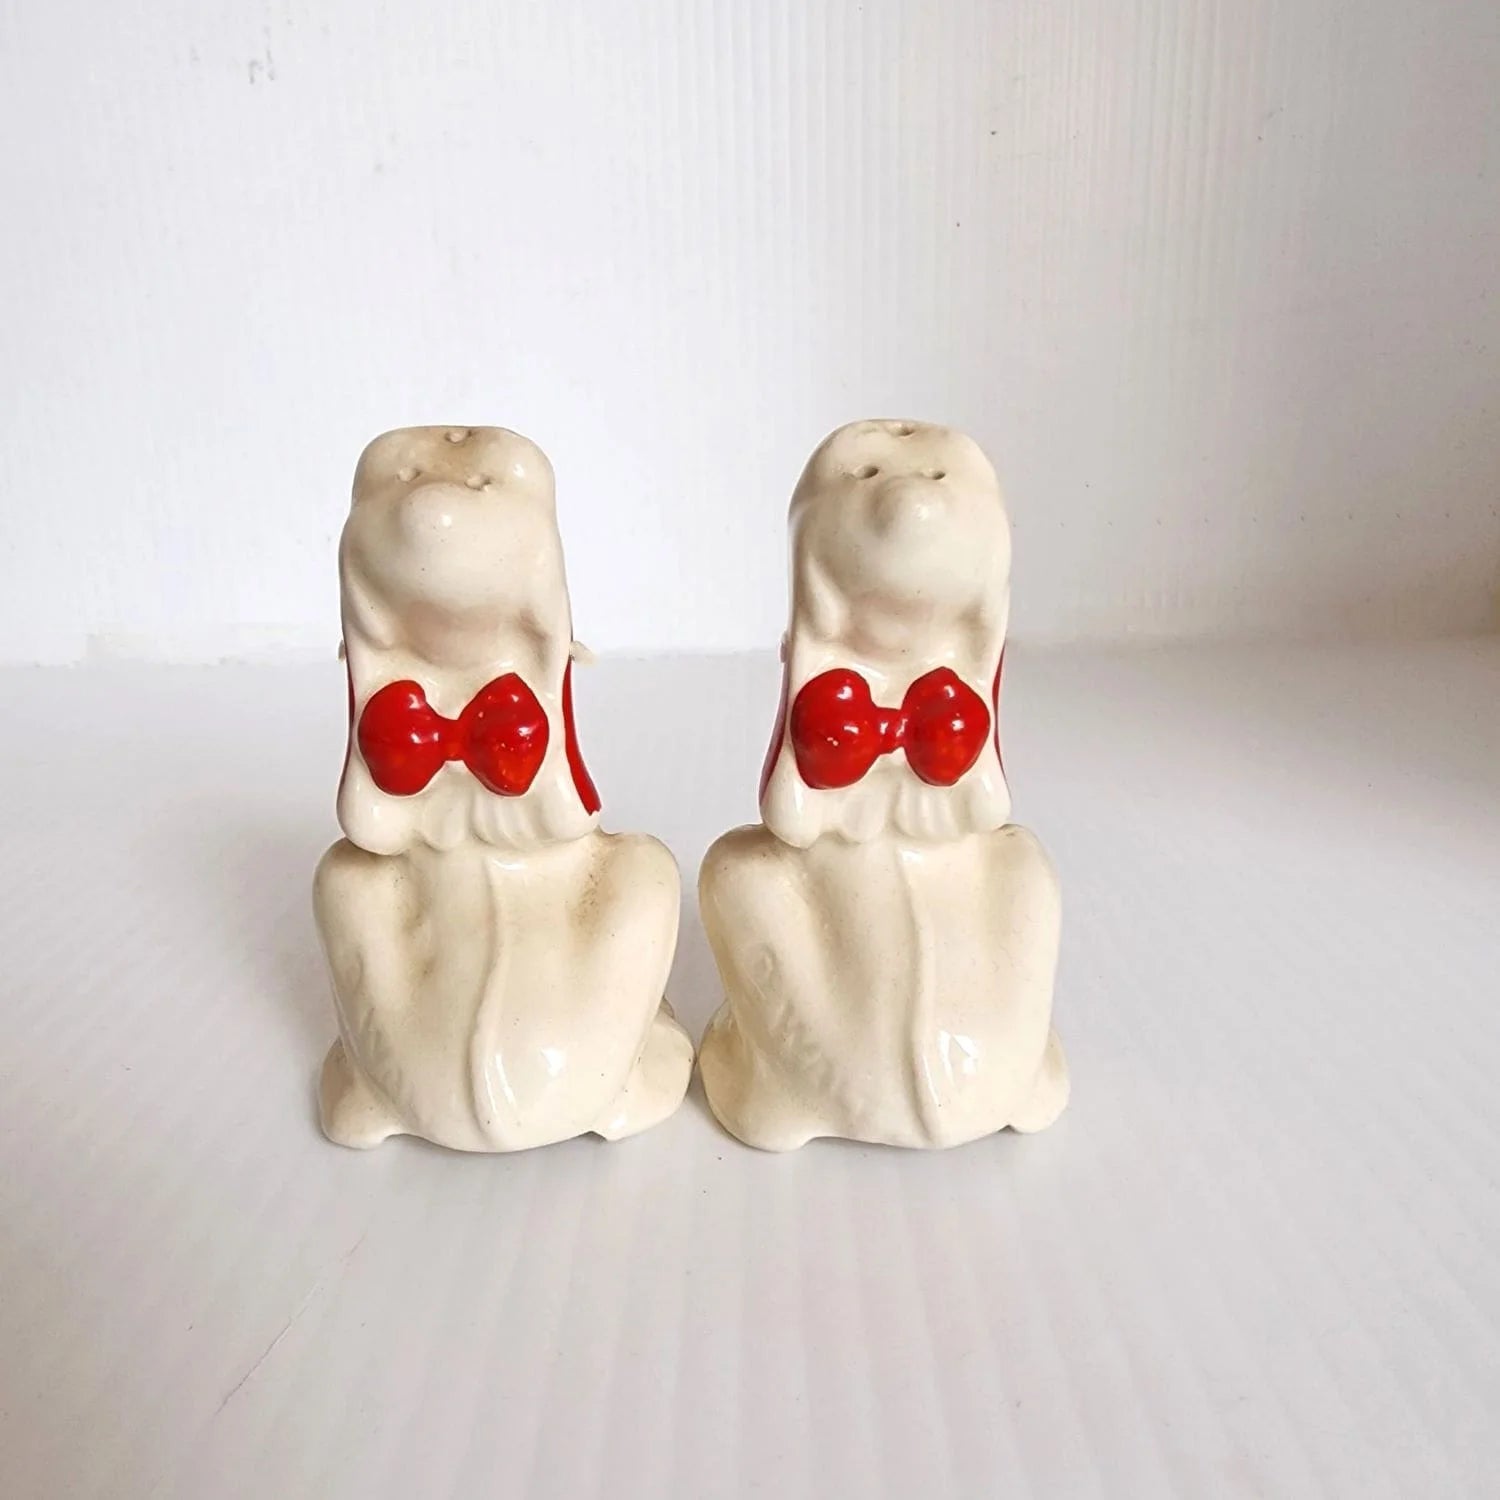 Pair of ceramic dog figurines with red noses, one seated and one standing, perfect for holiday decor.